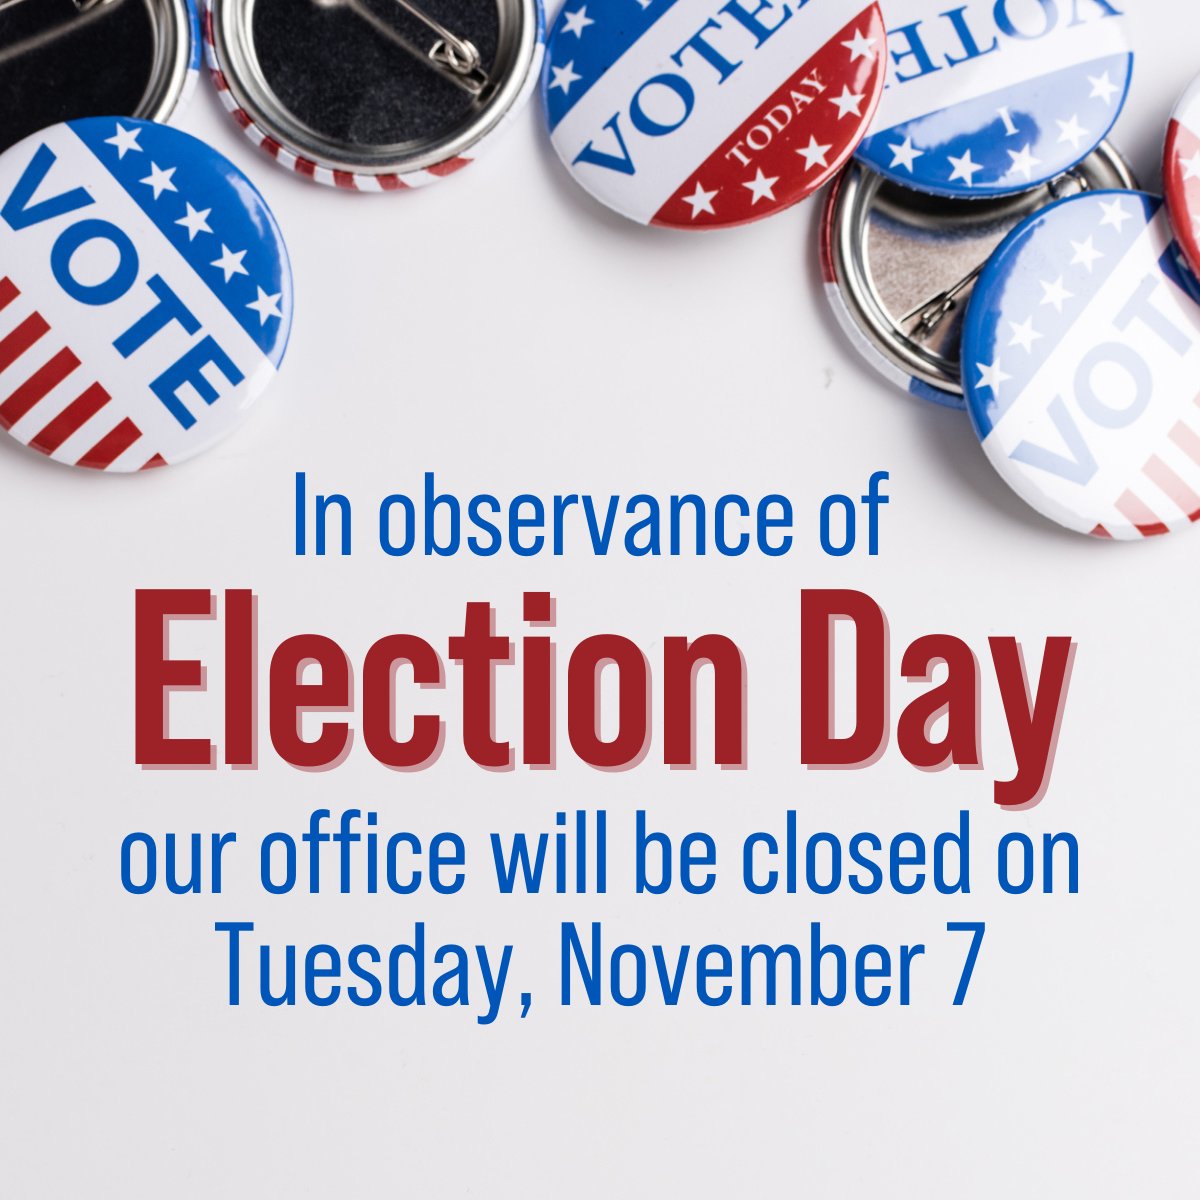 Good morning, neighbors! Reminder: Our office is closed tomorrow - Nov. 7 - in observance of Election Day! We will resume normal business hours on Wednesday, Nov. 8.